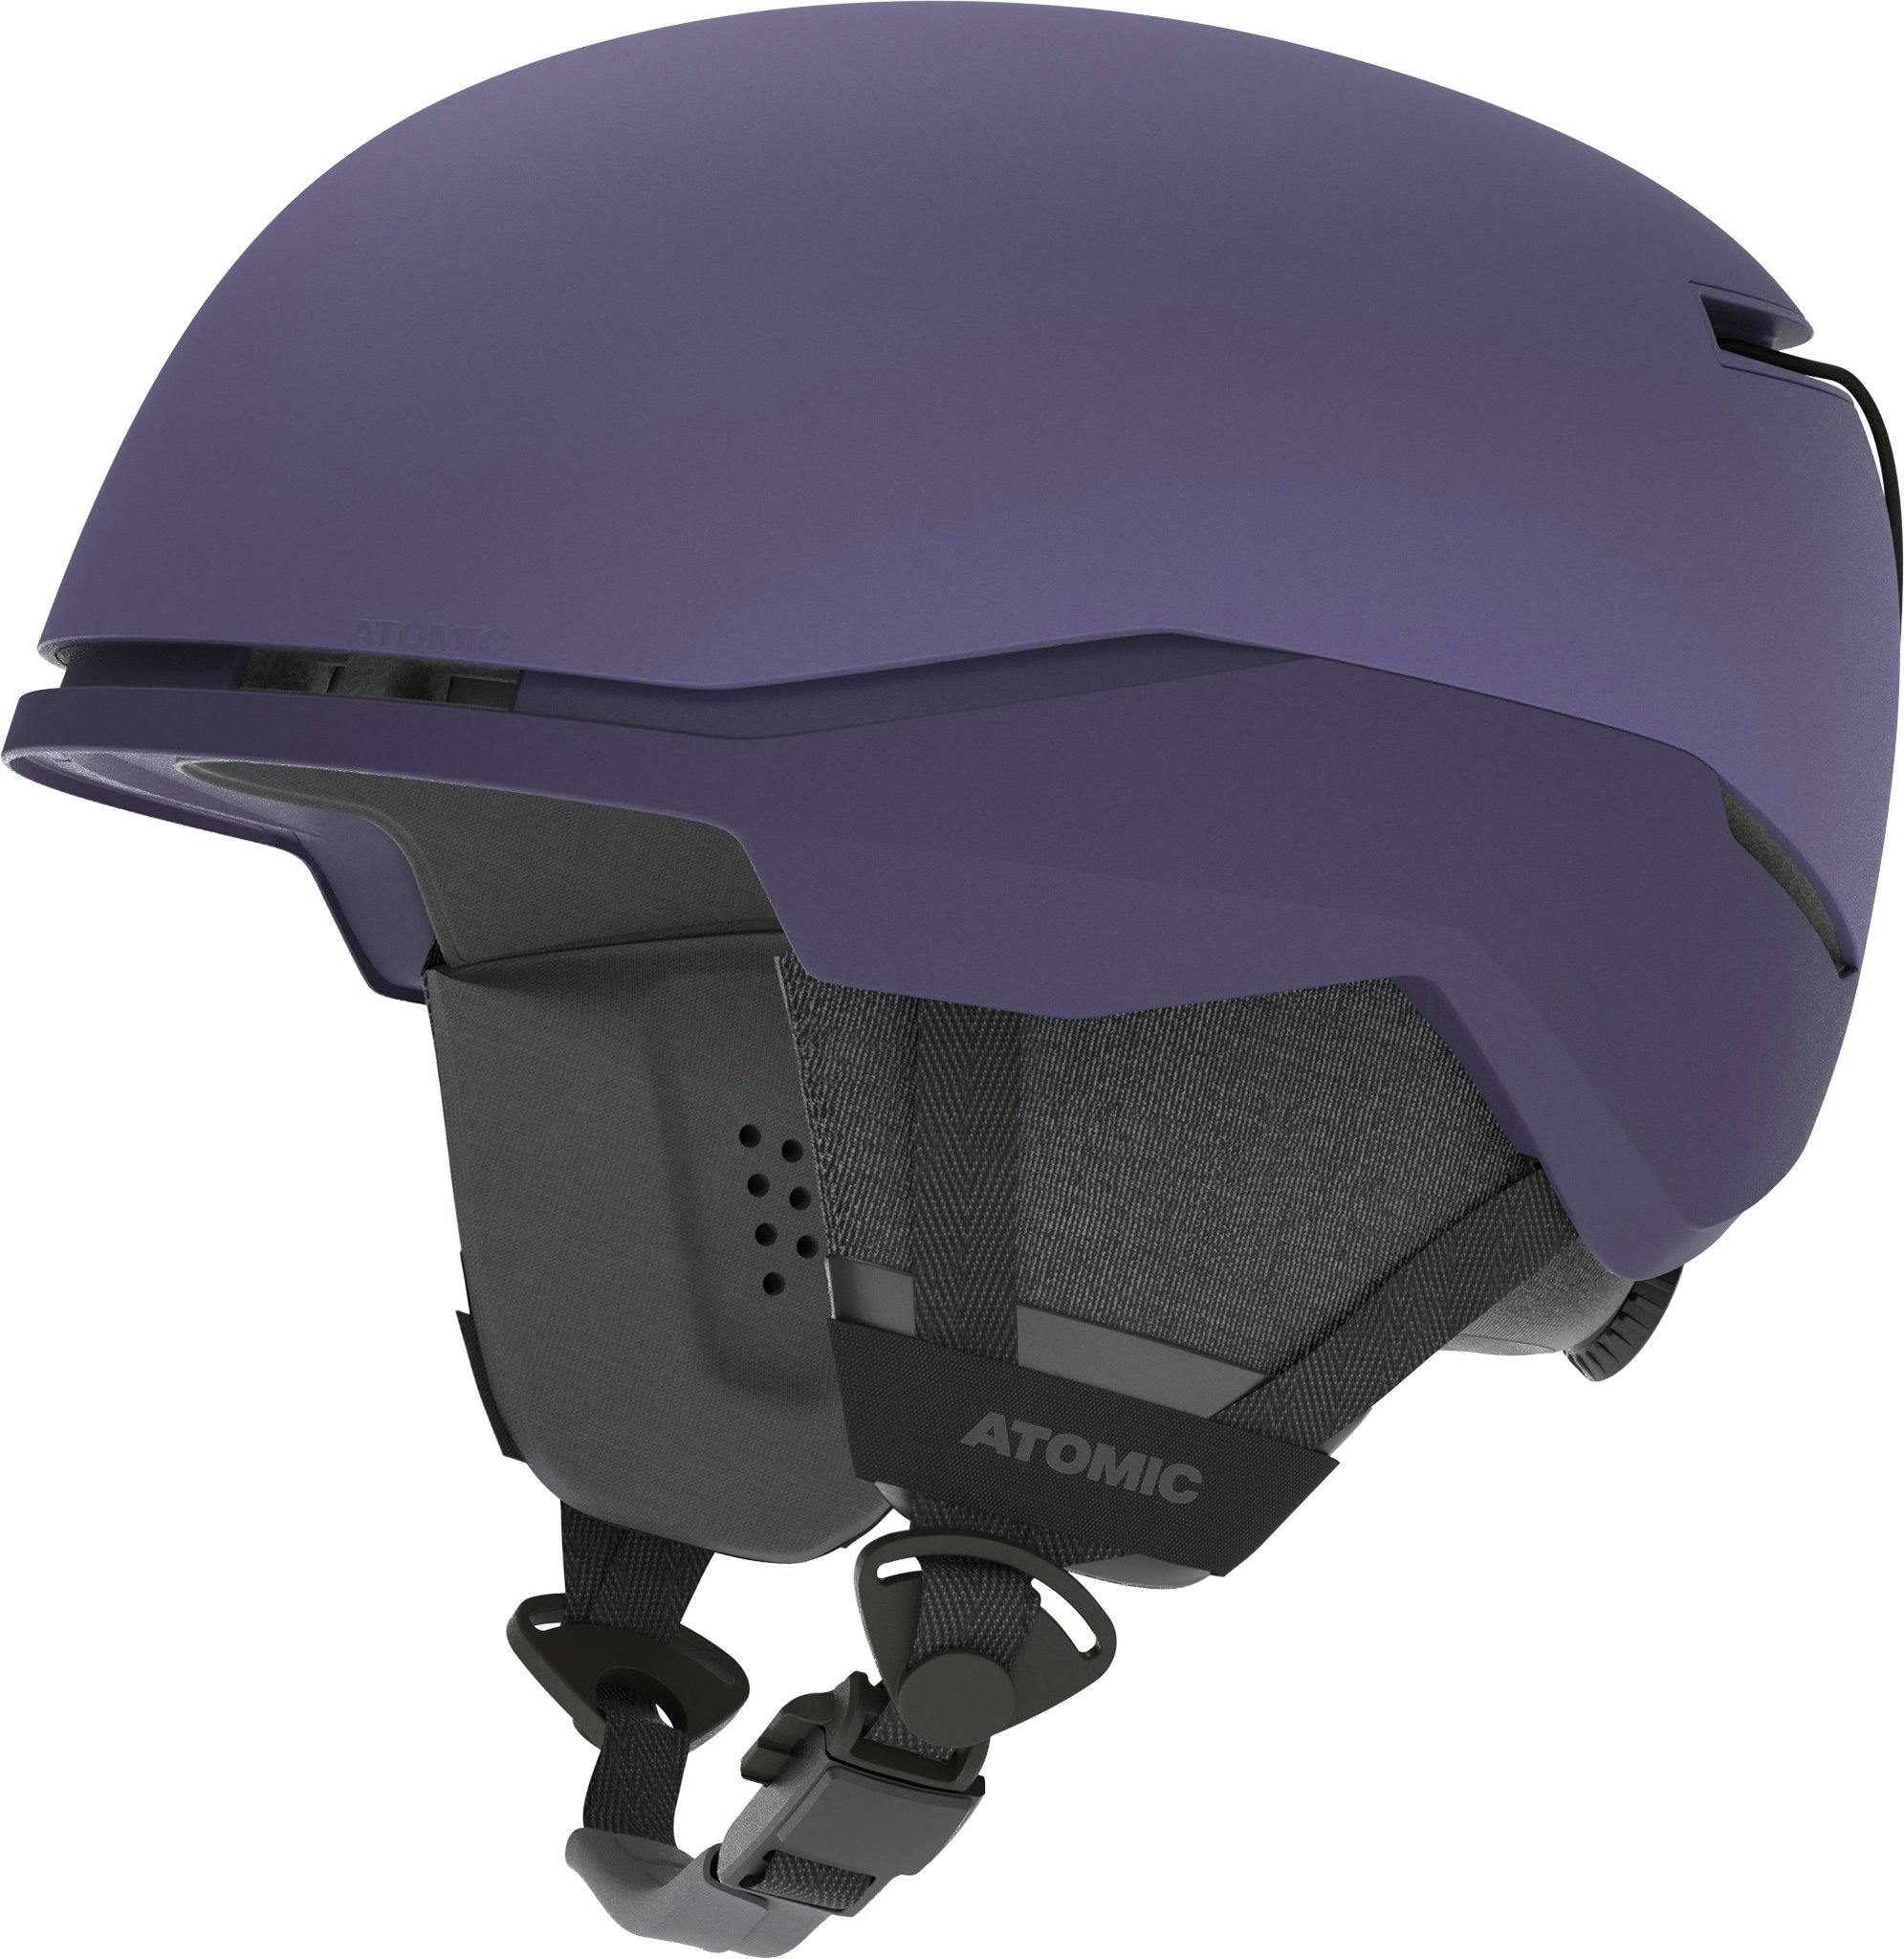 Product image for Four AMID Pro Helmet